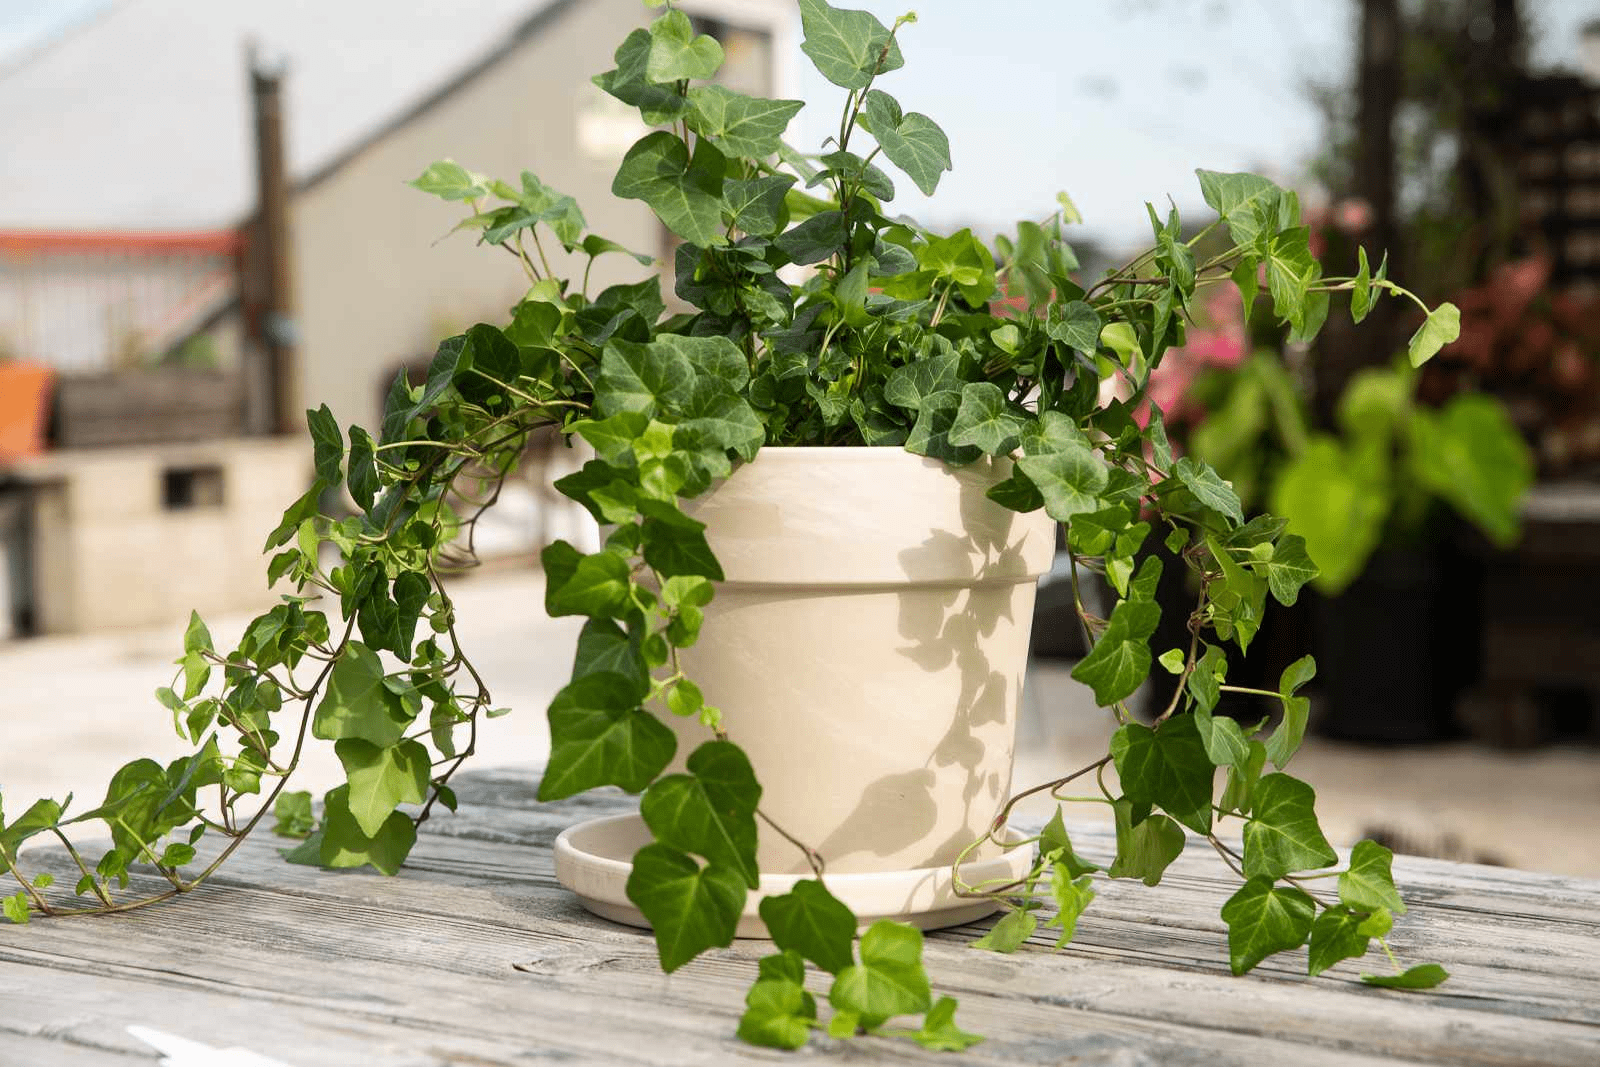 English Ivy makes a lovely house plant with beautiful, dark green leaves. Source: The Spruce.